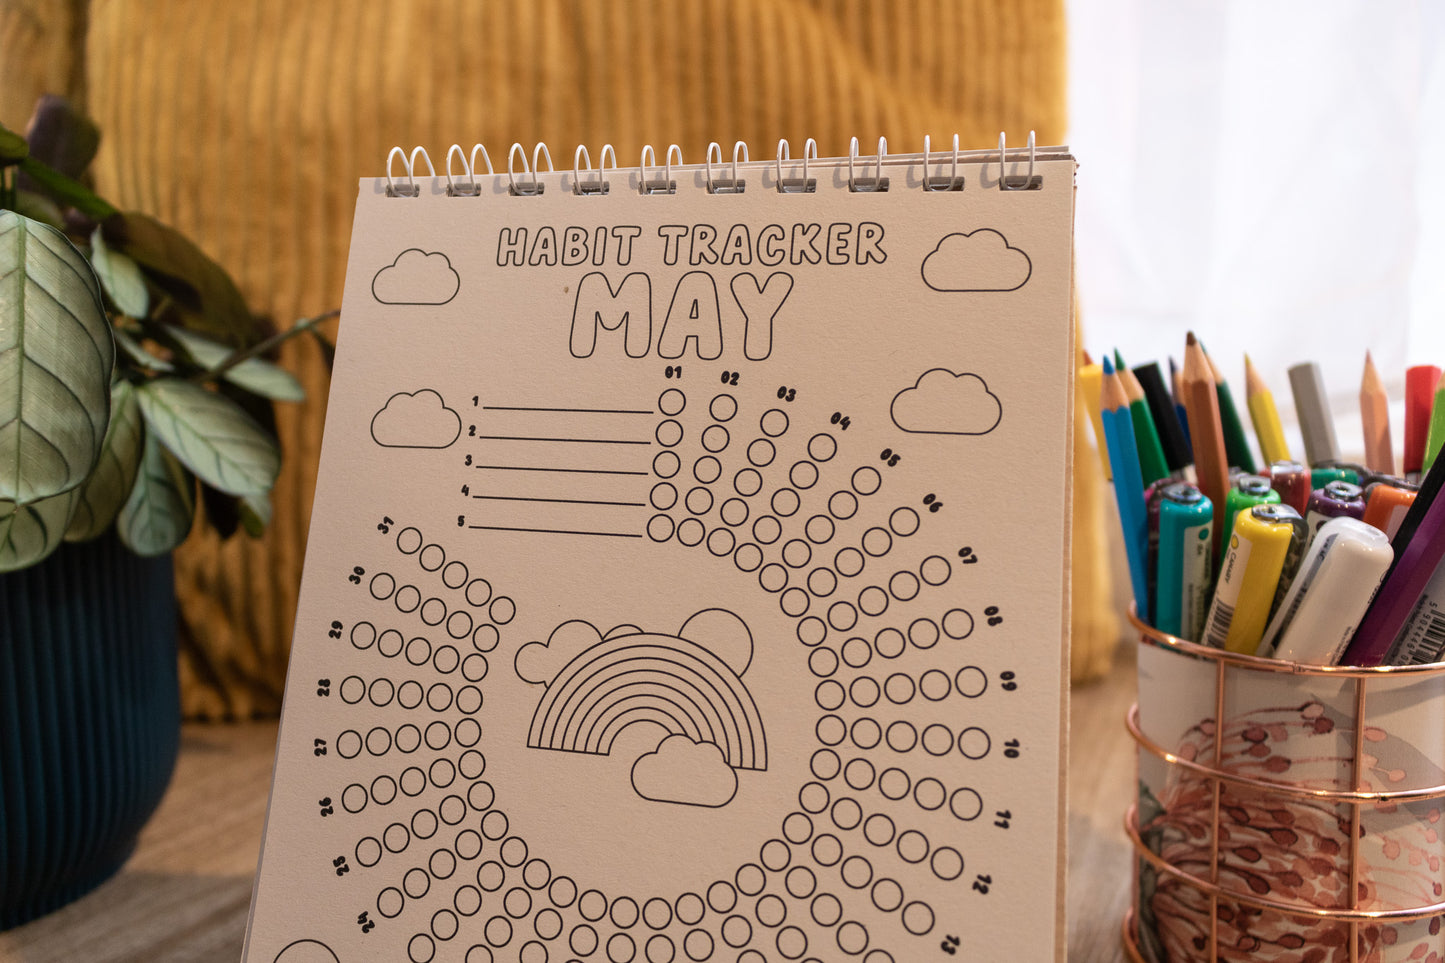 12-month Colouring Habit Tracker by MellowApricotStudio - A5 & A6 standing desk calendar - may page with rainbow